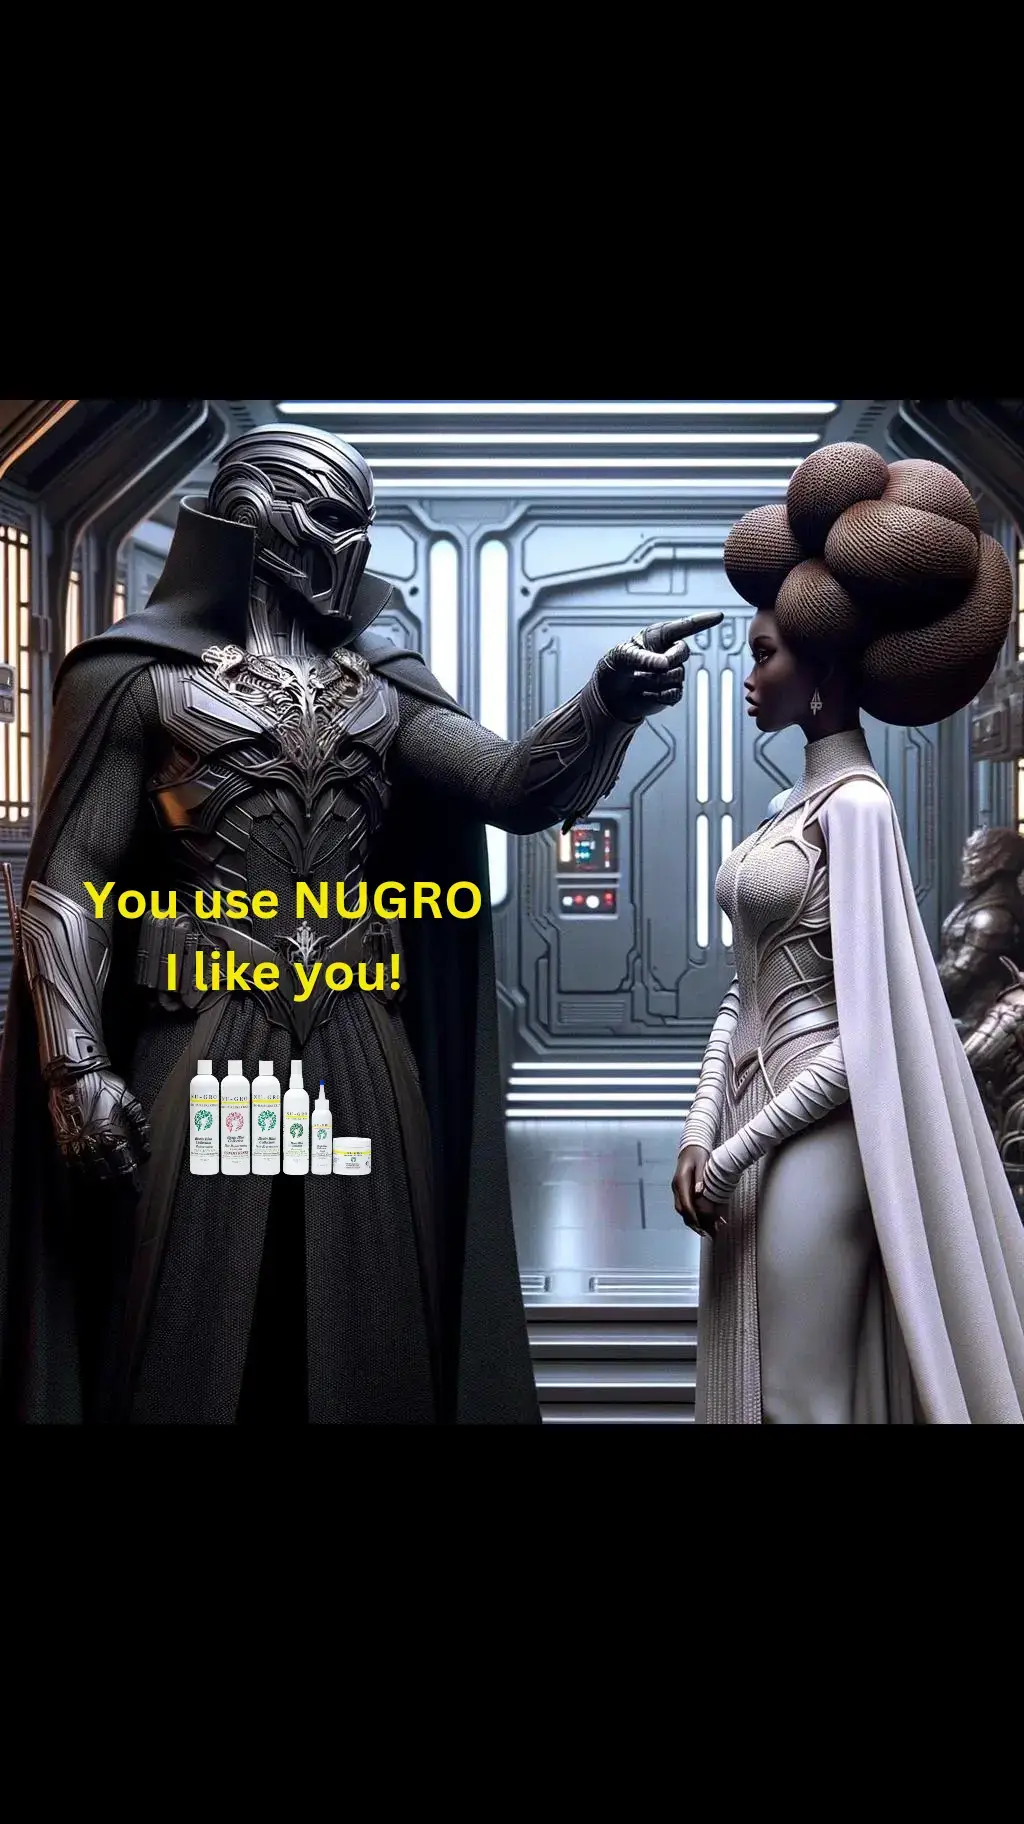 May the 4th be with you as you embrace the force of nourishment! Dive into a universe where your hair thrives with NUGRO, featuring star ingredients like Castor oil, Shea butter, and Biotin. Your strands deserve this galaxy of care! 🌌✨  Find it at @nu.gro or your local beauty supply store. Tell me how you're wearing your hair in the comments 👇🏾👇🏾👇🏾 Thank God for false hair, ponytails and weave. But Nugro grows hair like you won’t believe! Follow 💛Like💛Share💛Shop💛#protectivestyles #afro #melaninpoppin #naturalhairjourney #naturalhair 